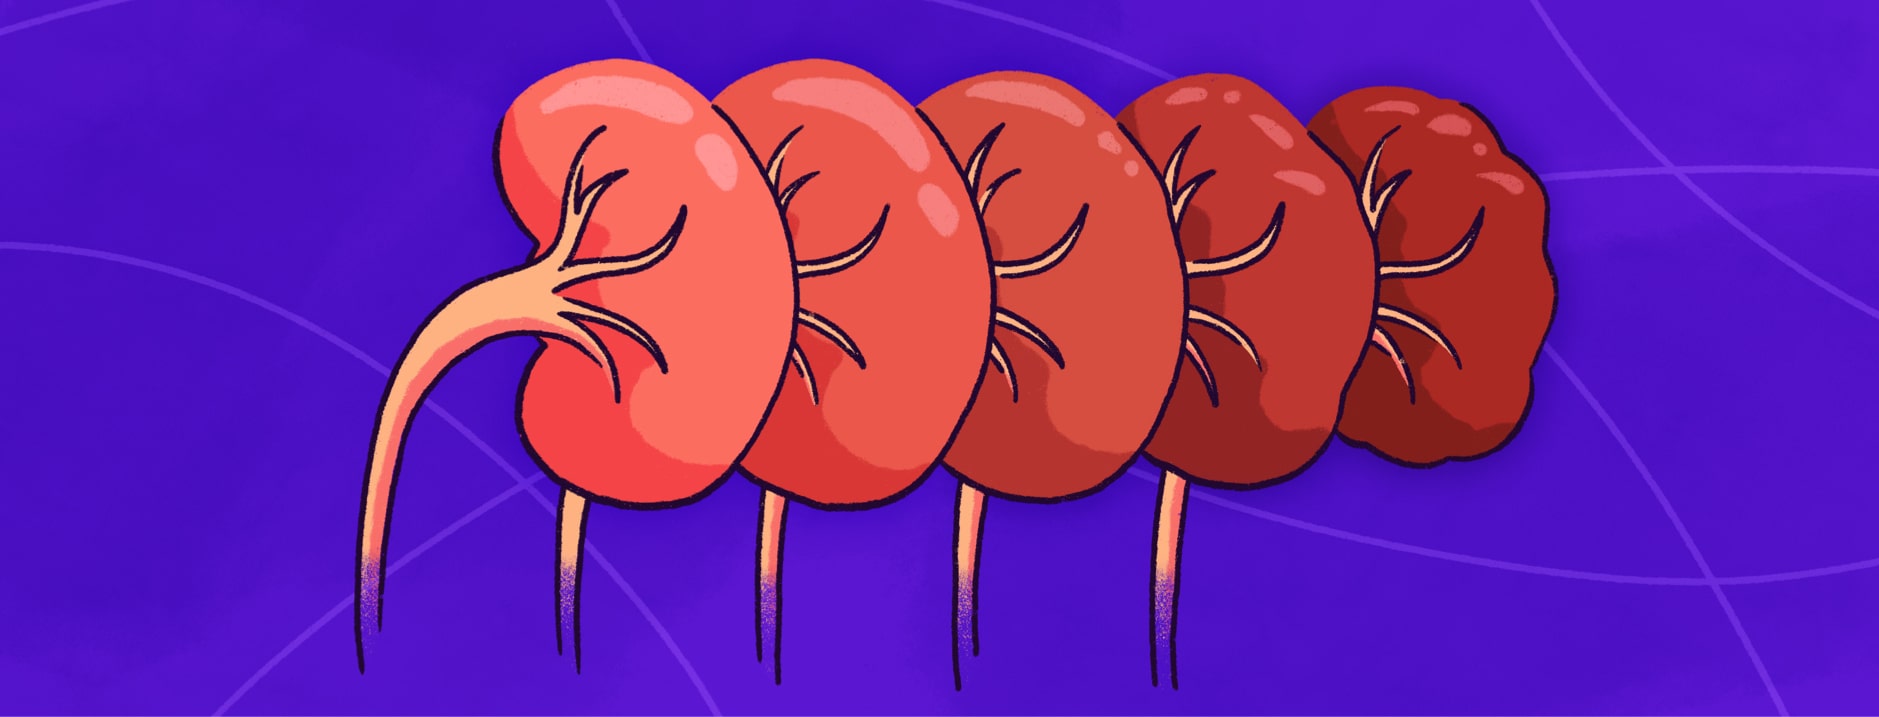 Do You Know The Stages Of Chronic Kidney Disease? image